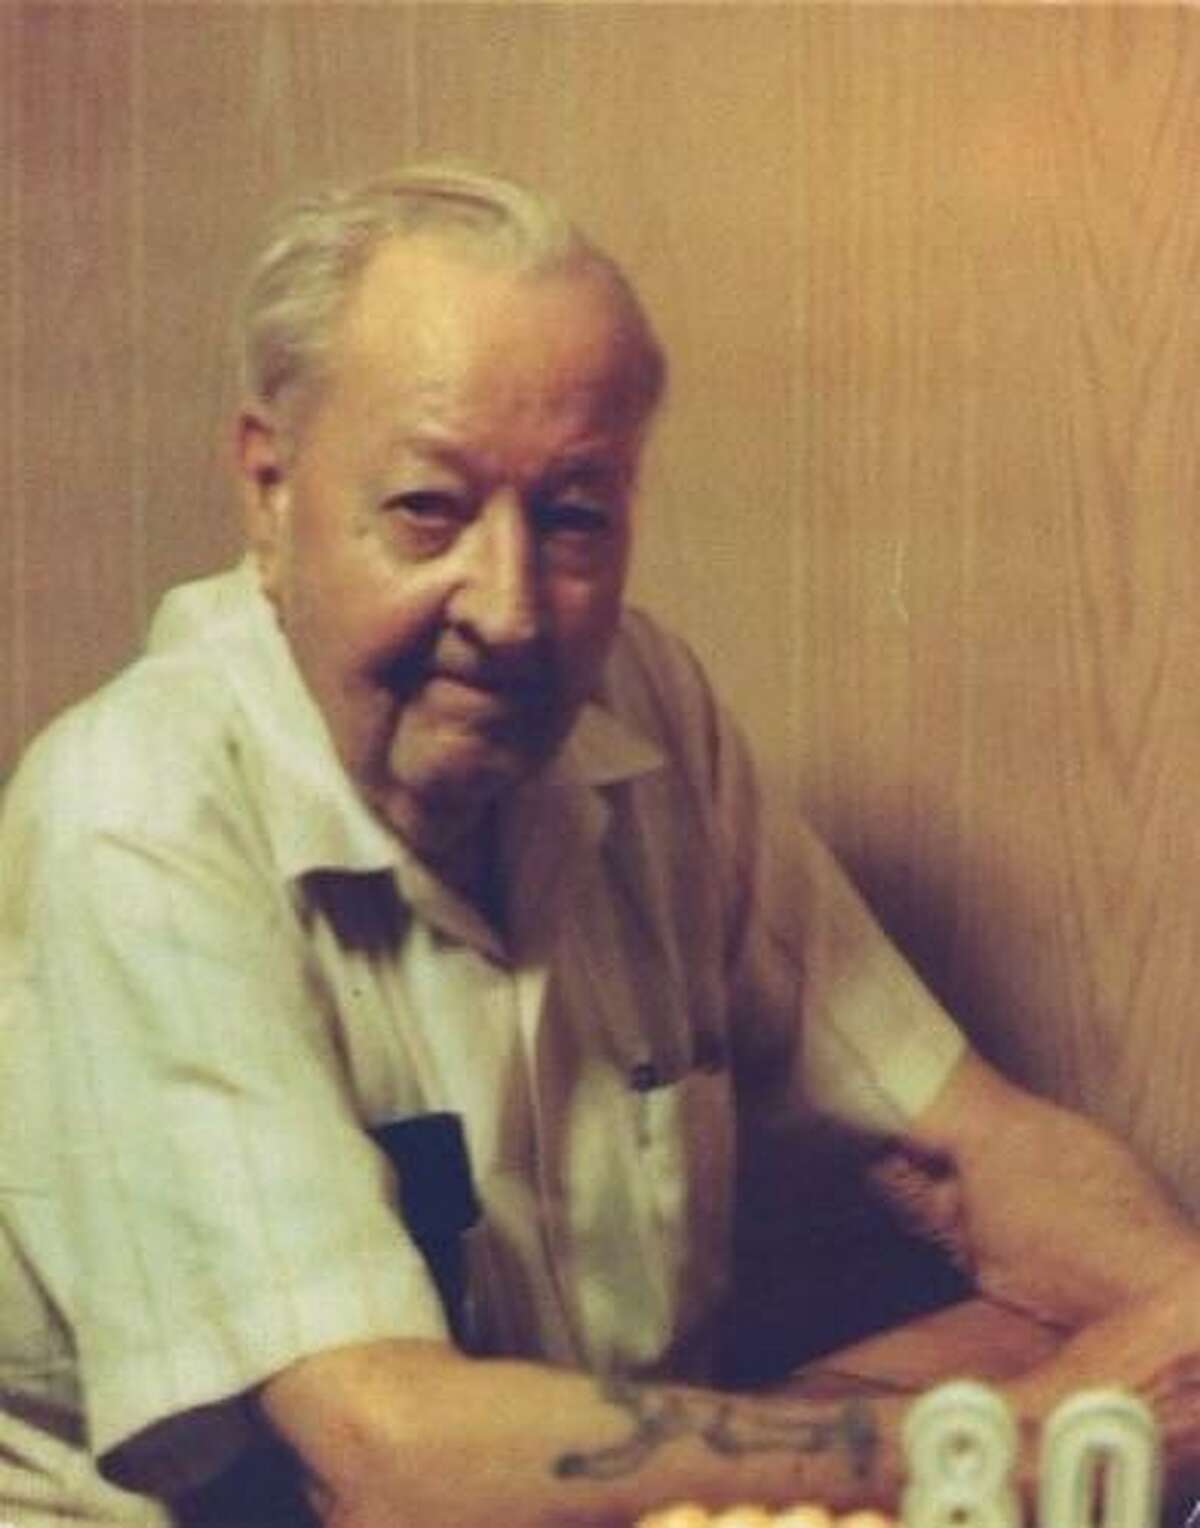 Bob Jones, shown here in 1980, was a local restaurateur whose Bob Jones Cafe sponsored a Harlandale-based amateur baseball team during the mid-to-late 1930s.